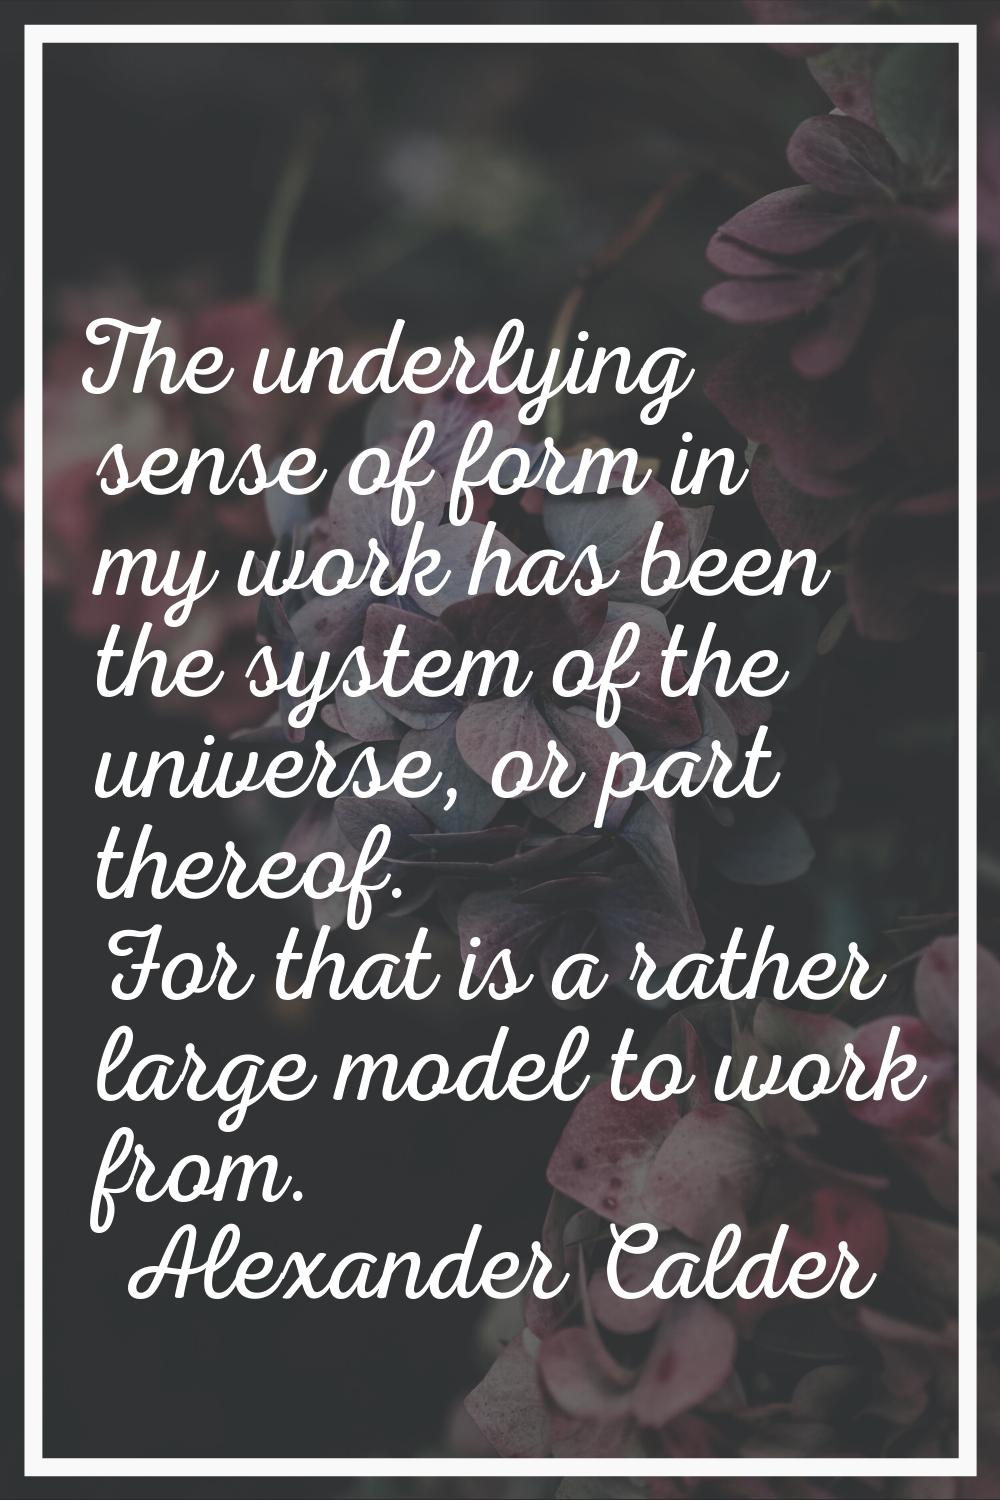 The underlying sense of form in my work has been the system of the universe, or part thereof. For t